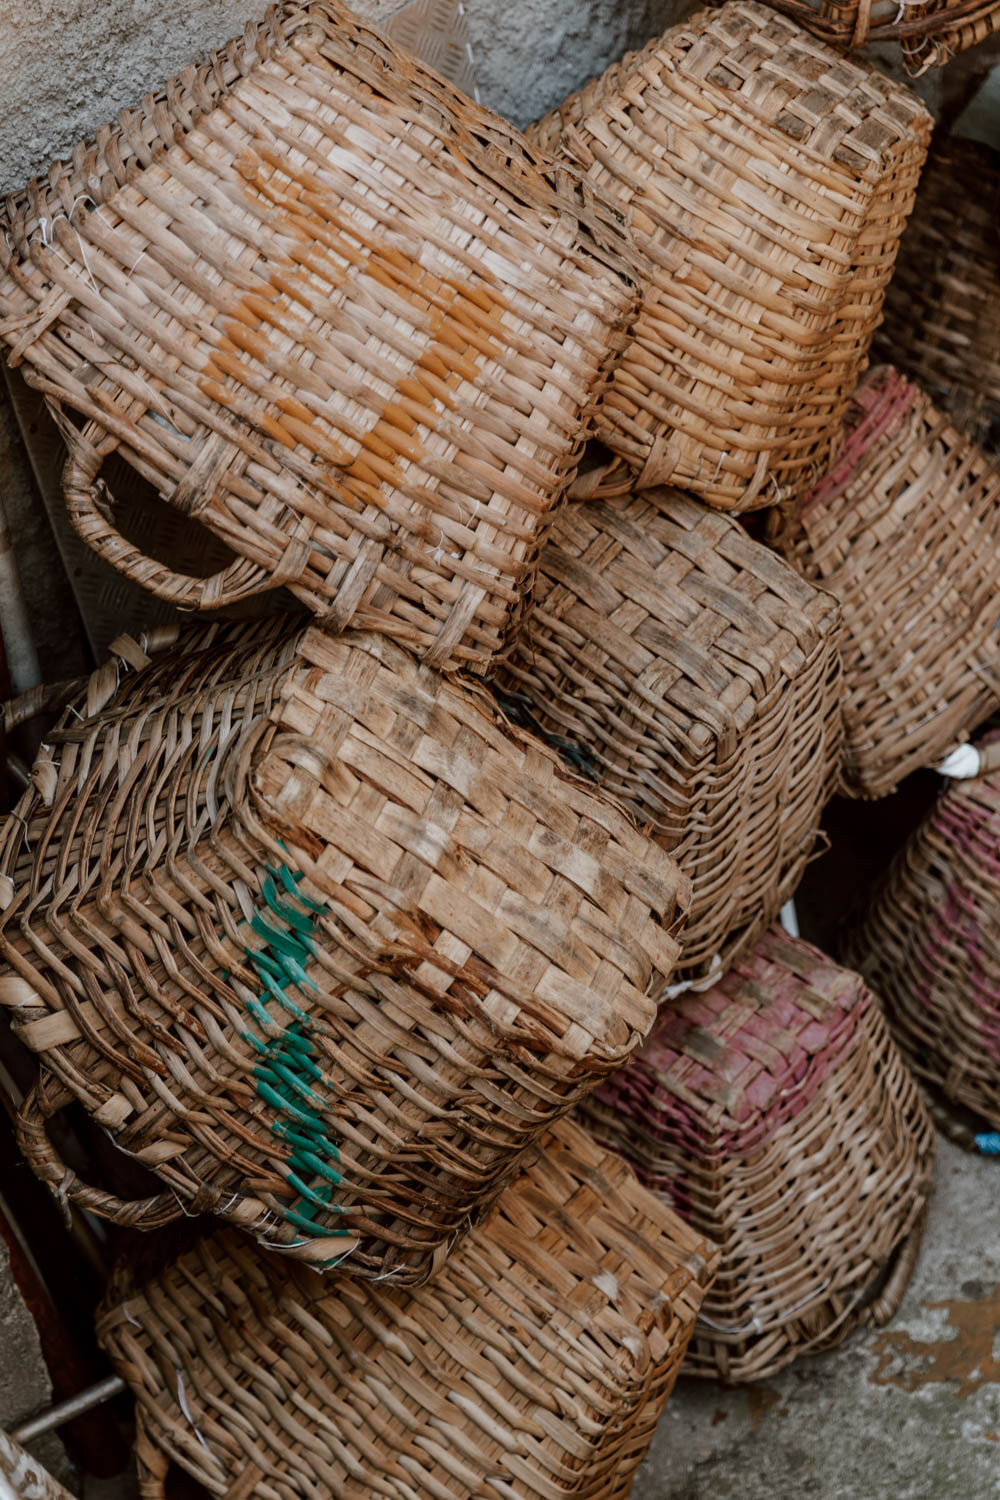 pile of straw weave baskets